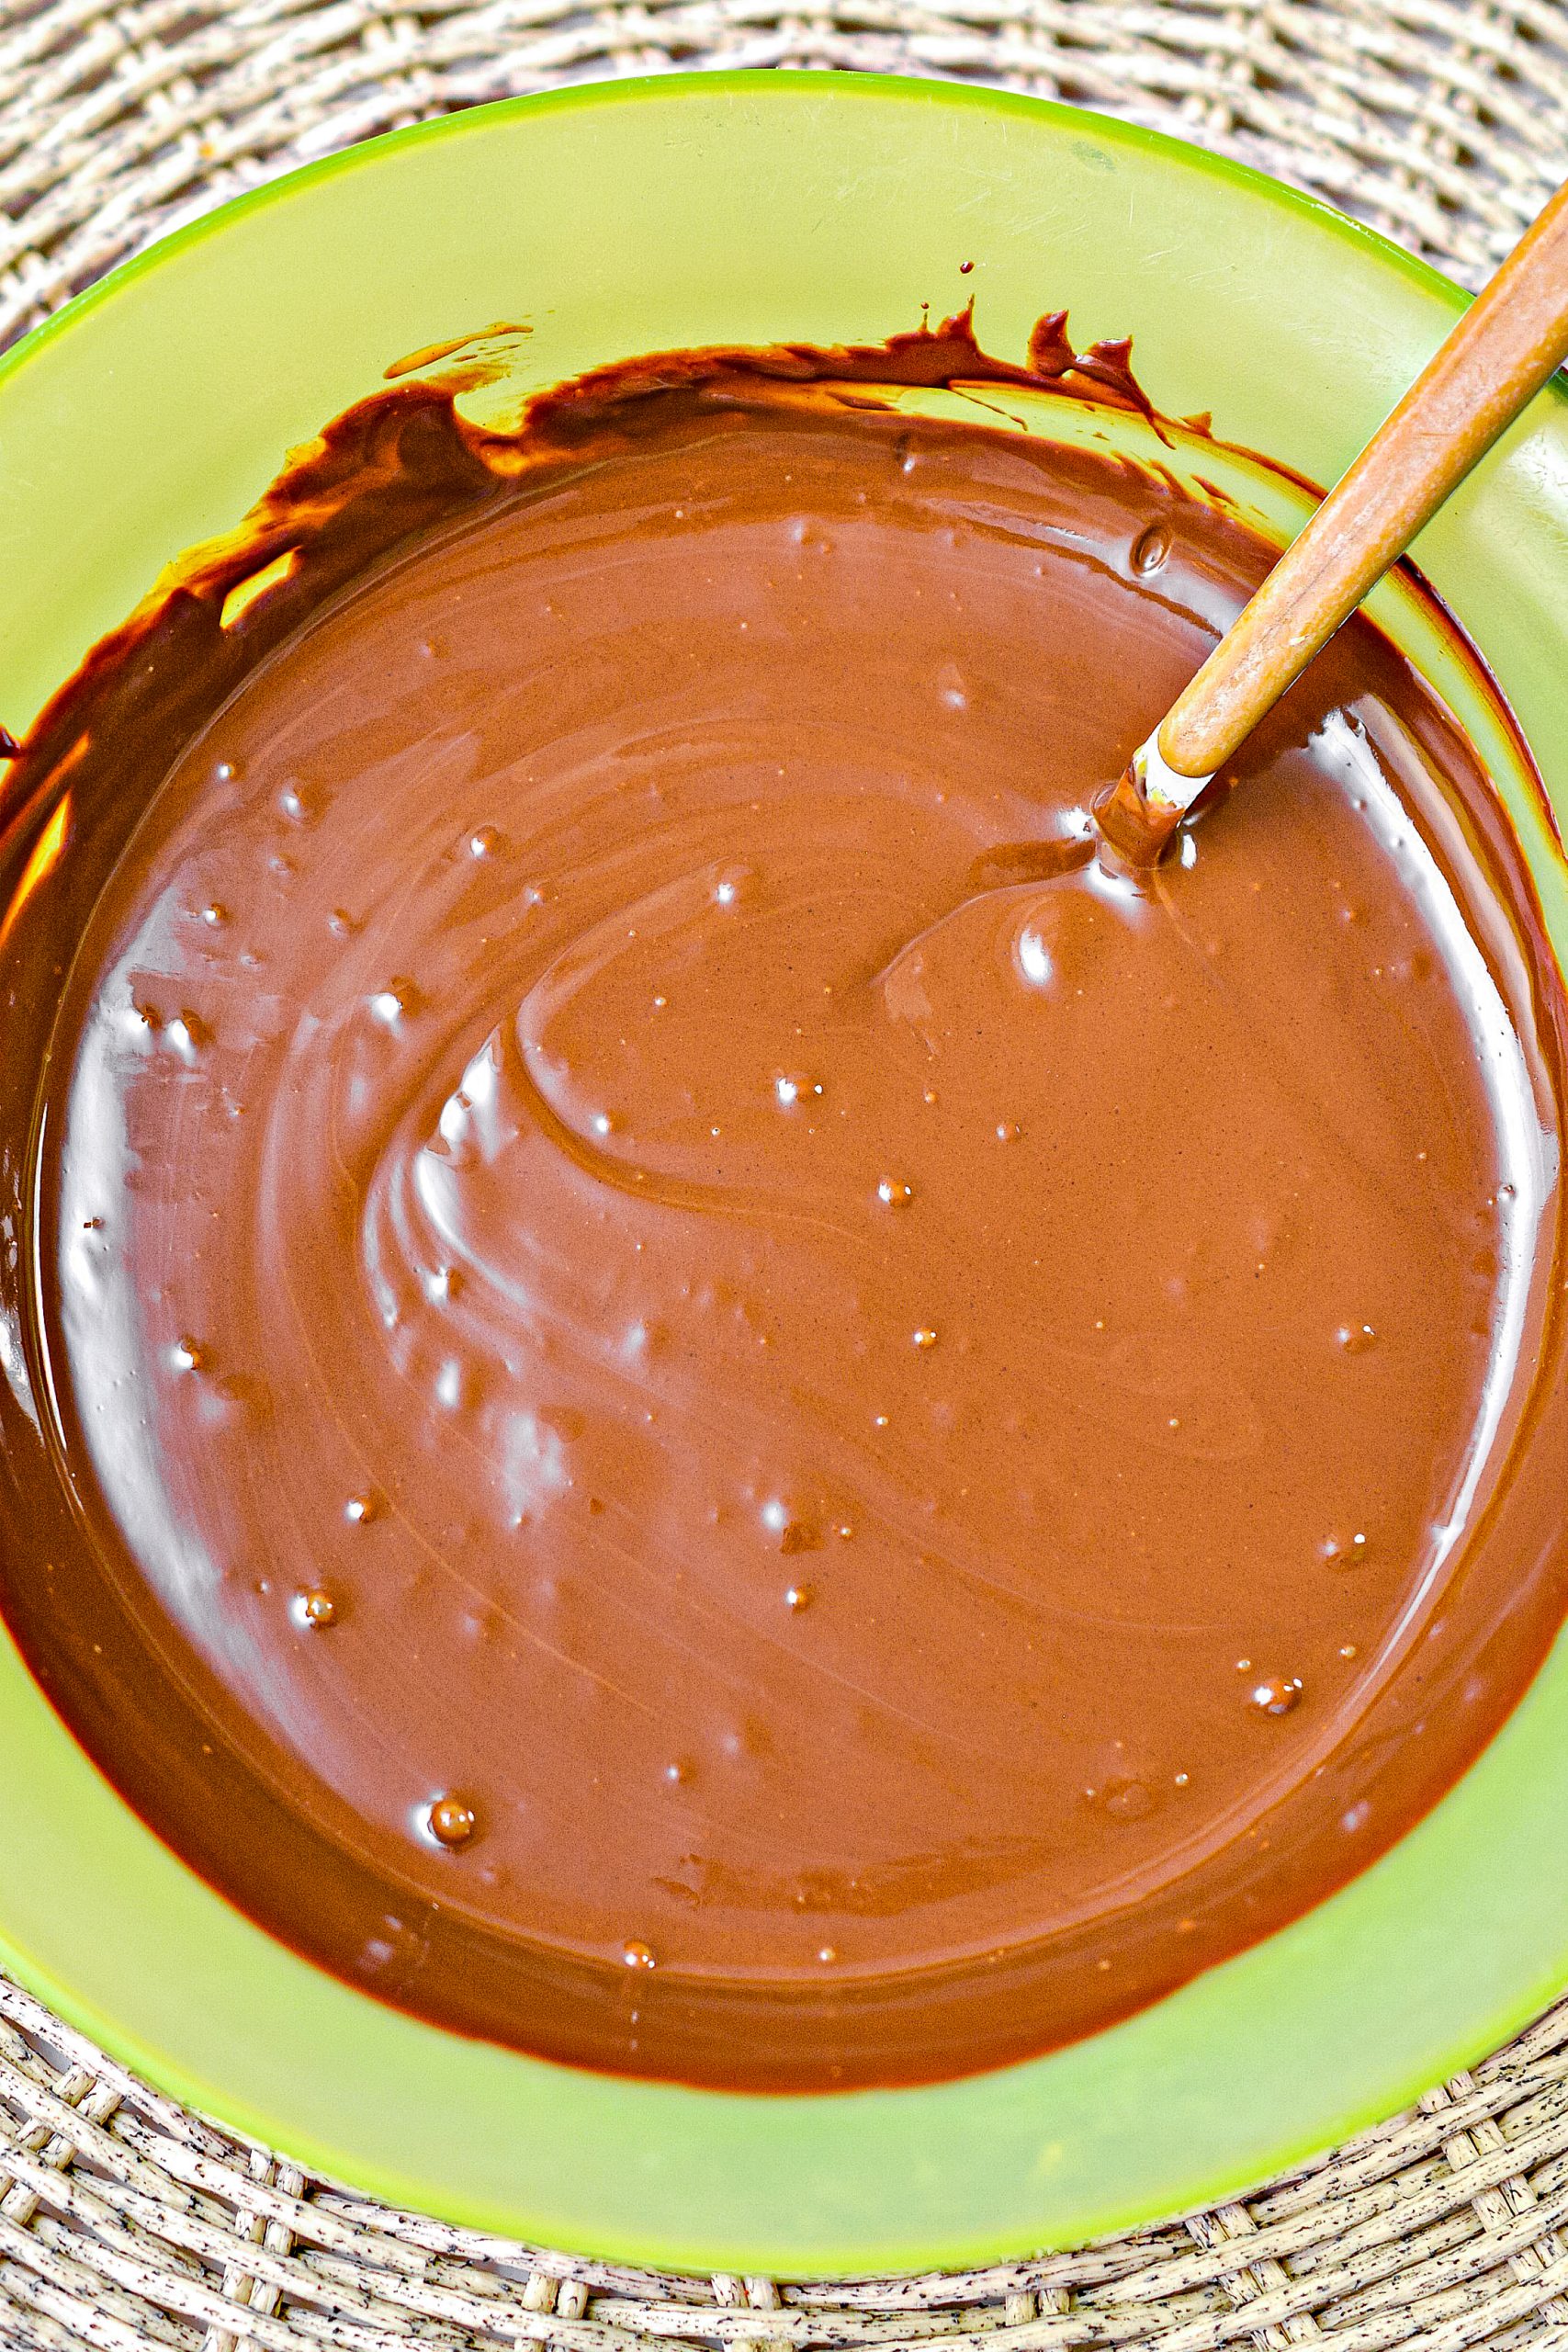 Put the chocolate chips and peanut butter into a microwave-safe bowl, and heat at 30-second increments until the chocolate chips are melted and the ingredients are well combined.